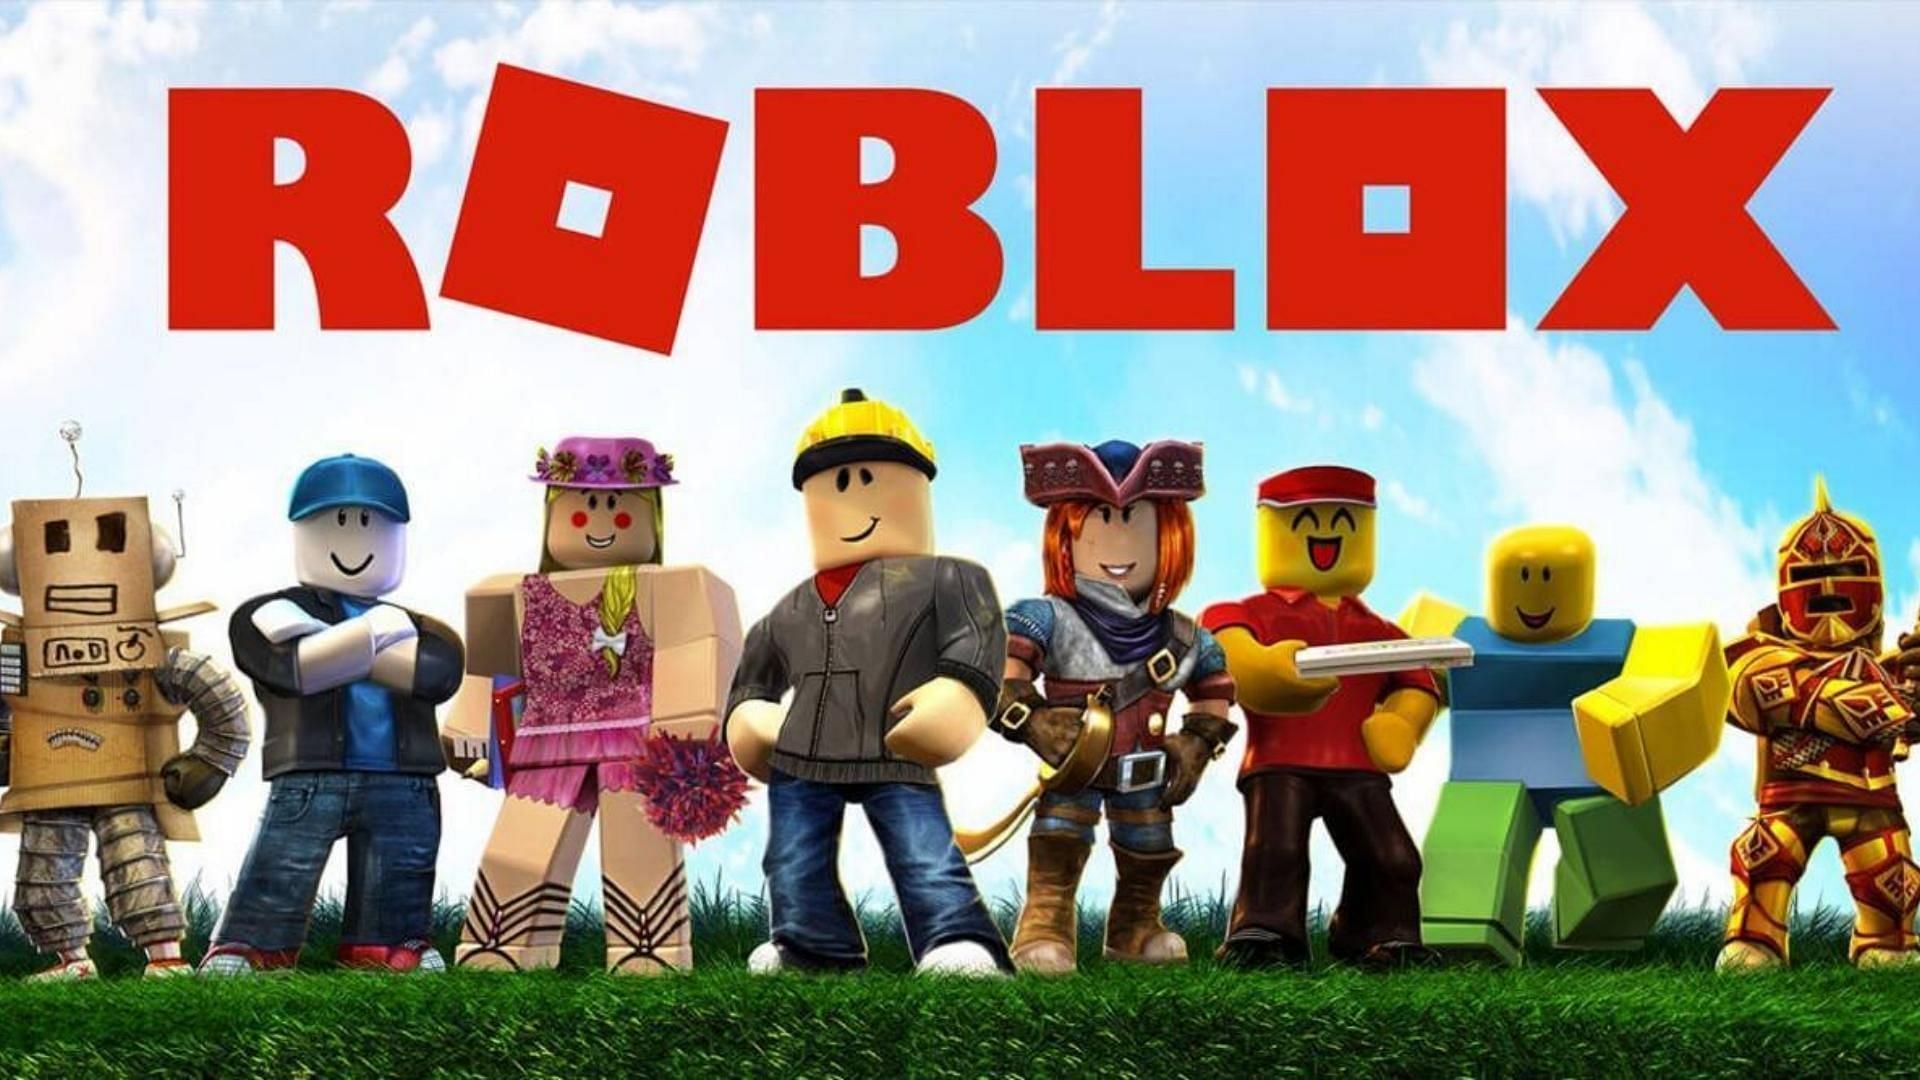 Roblox consists of several mini-games that players love to experience on the platform but the first game still remains a timeless classic. (Image via Roblox)